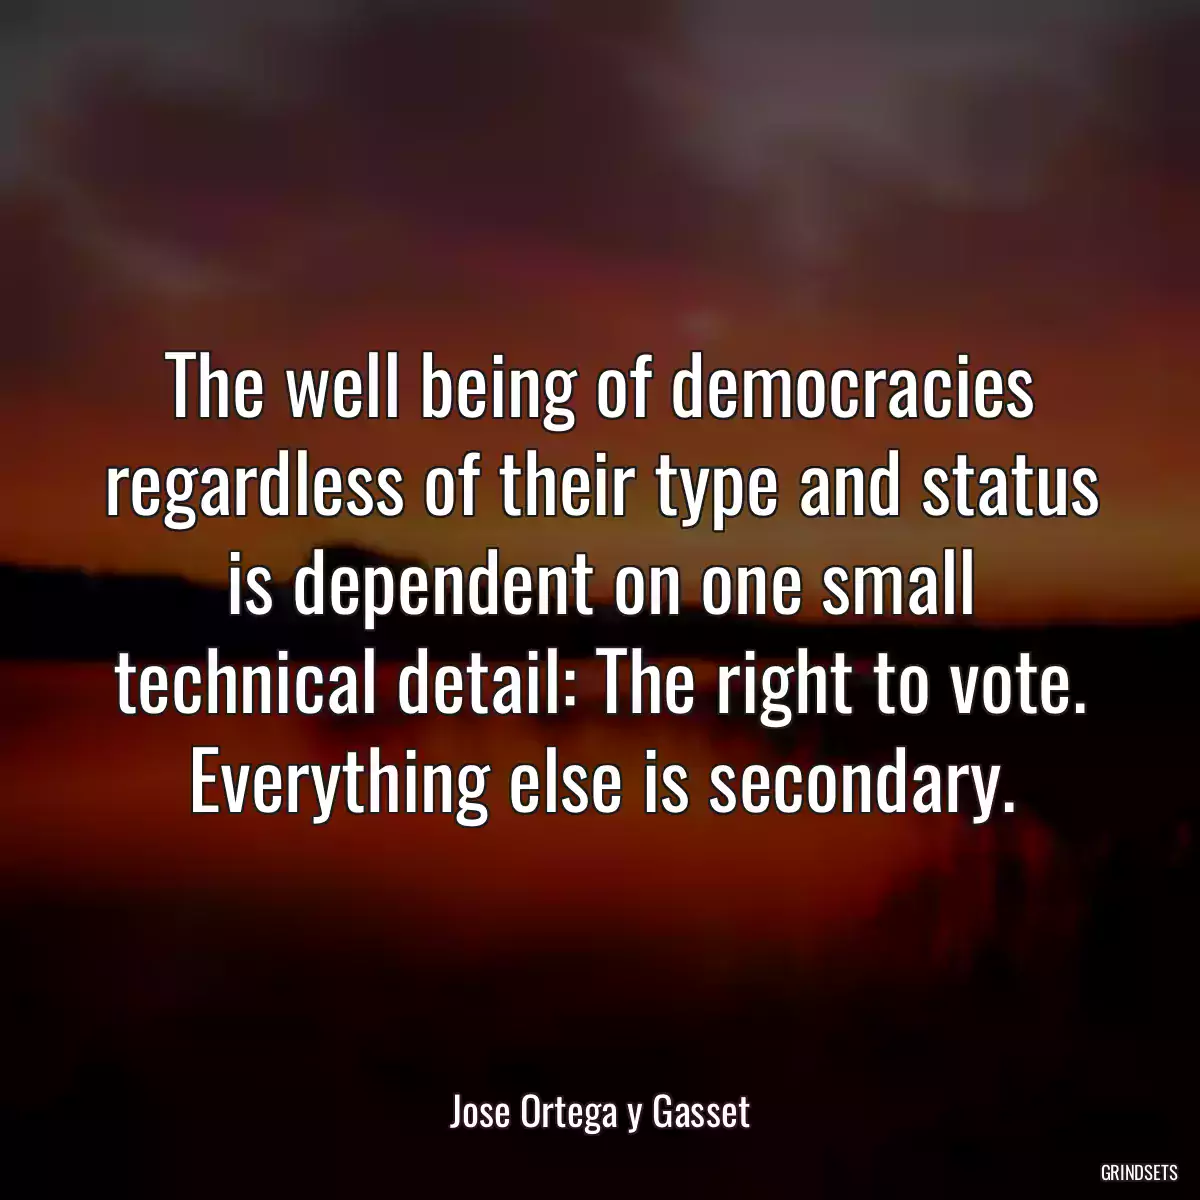 The well being of democracies regardless of their type and status is dependent on one small technical detail: The right to vote. Everything else is secondary.